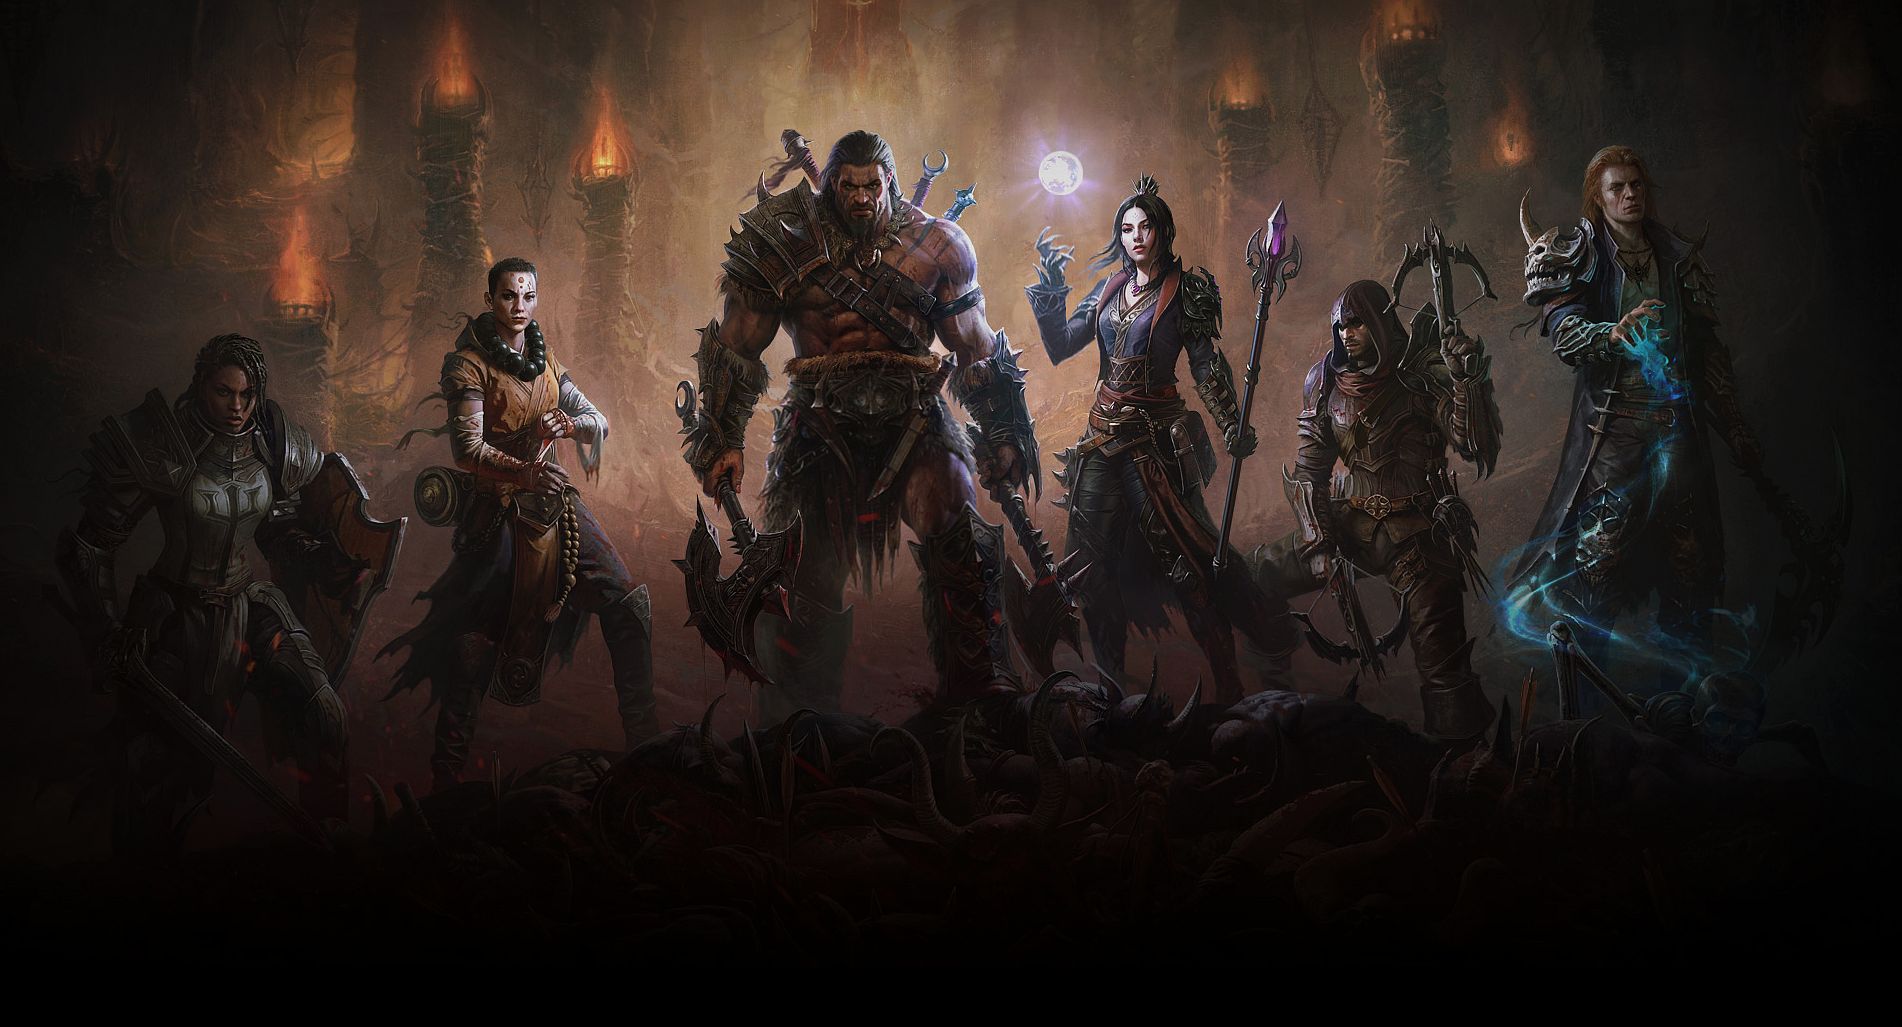 Image for Blizzard challenges criticism of Diablo Immortal microtransactions, says "vast majority" of players aren't spending money